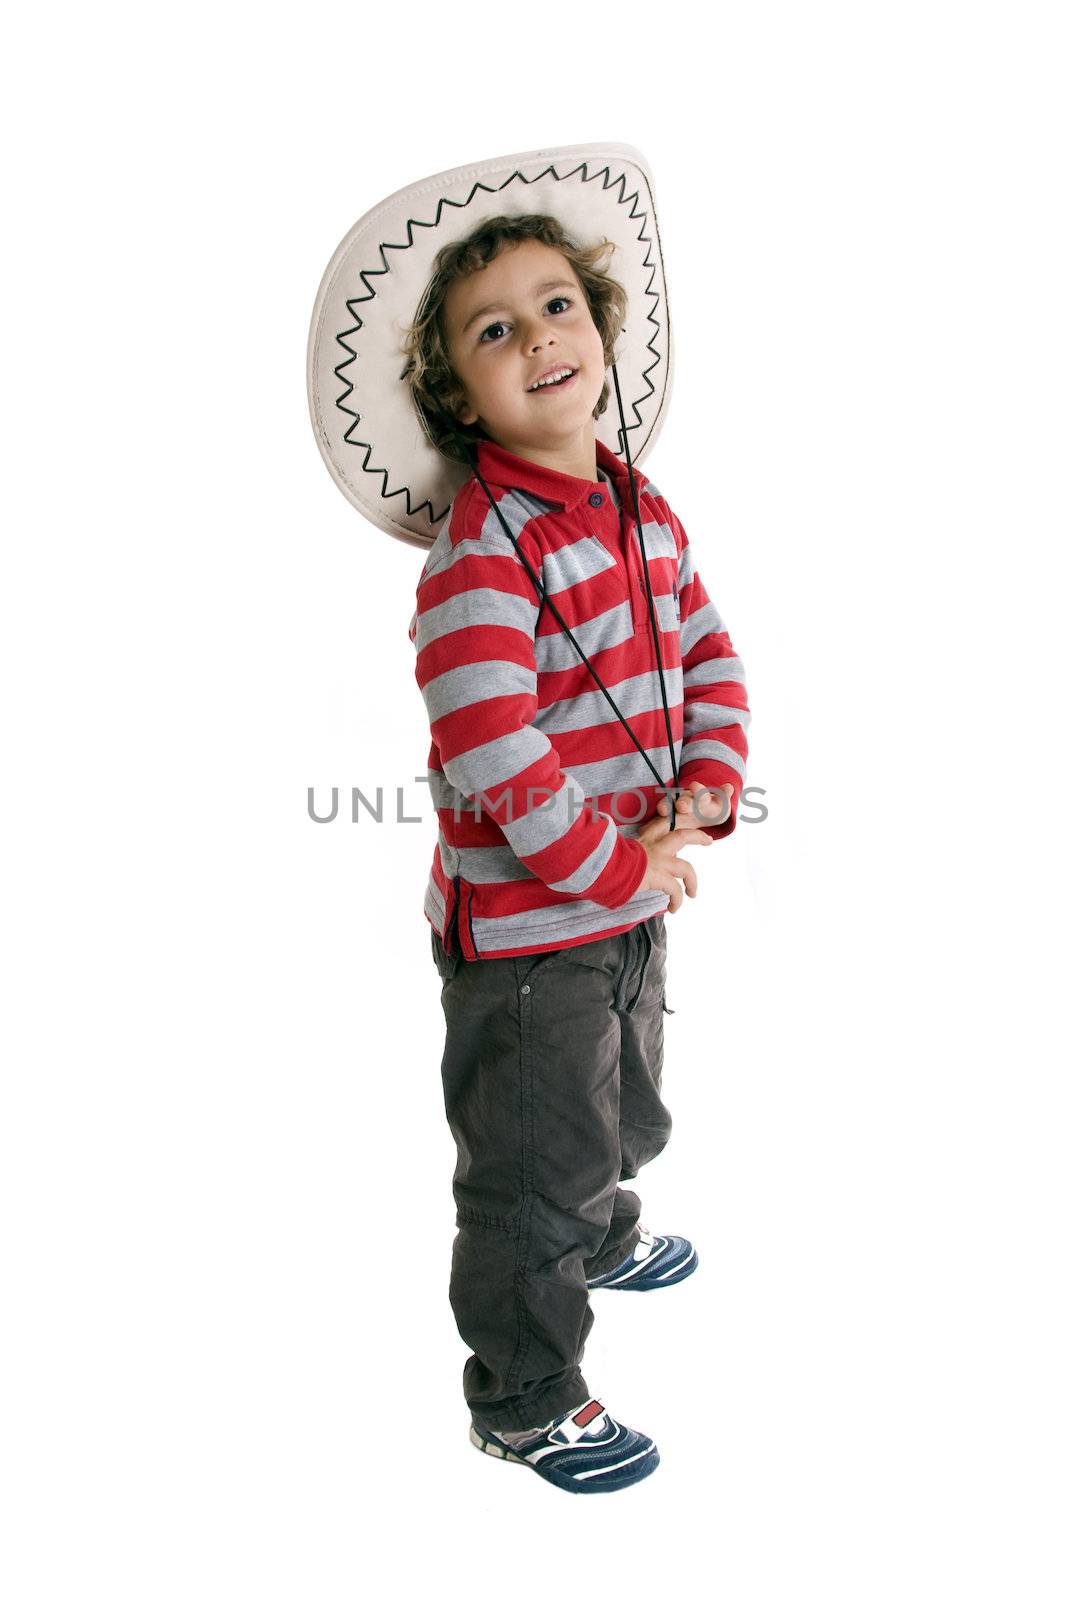 kid with cowboy hat over whith background